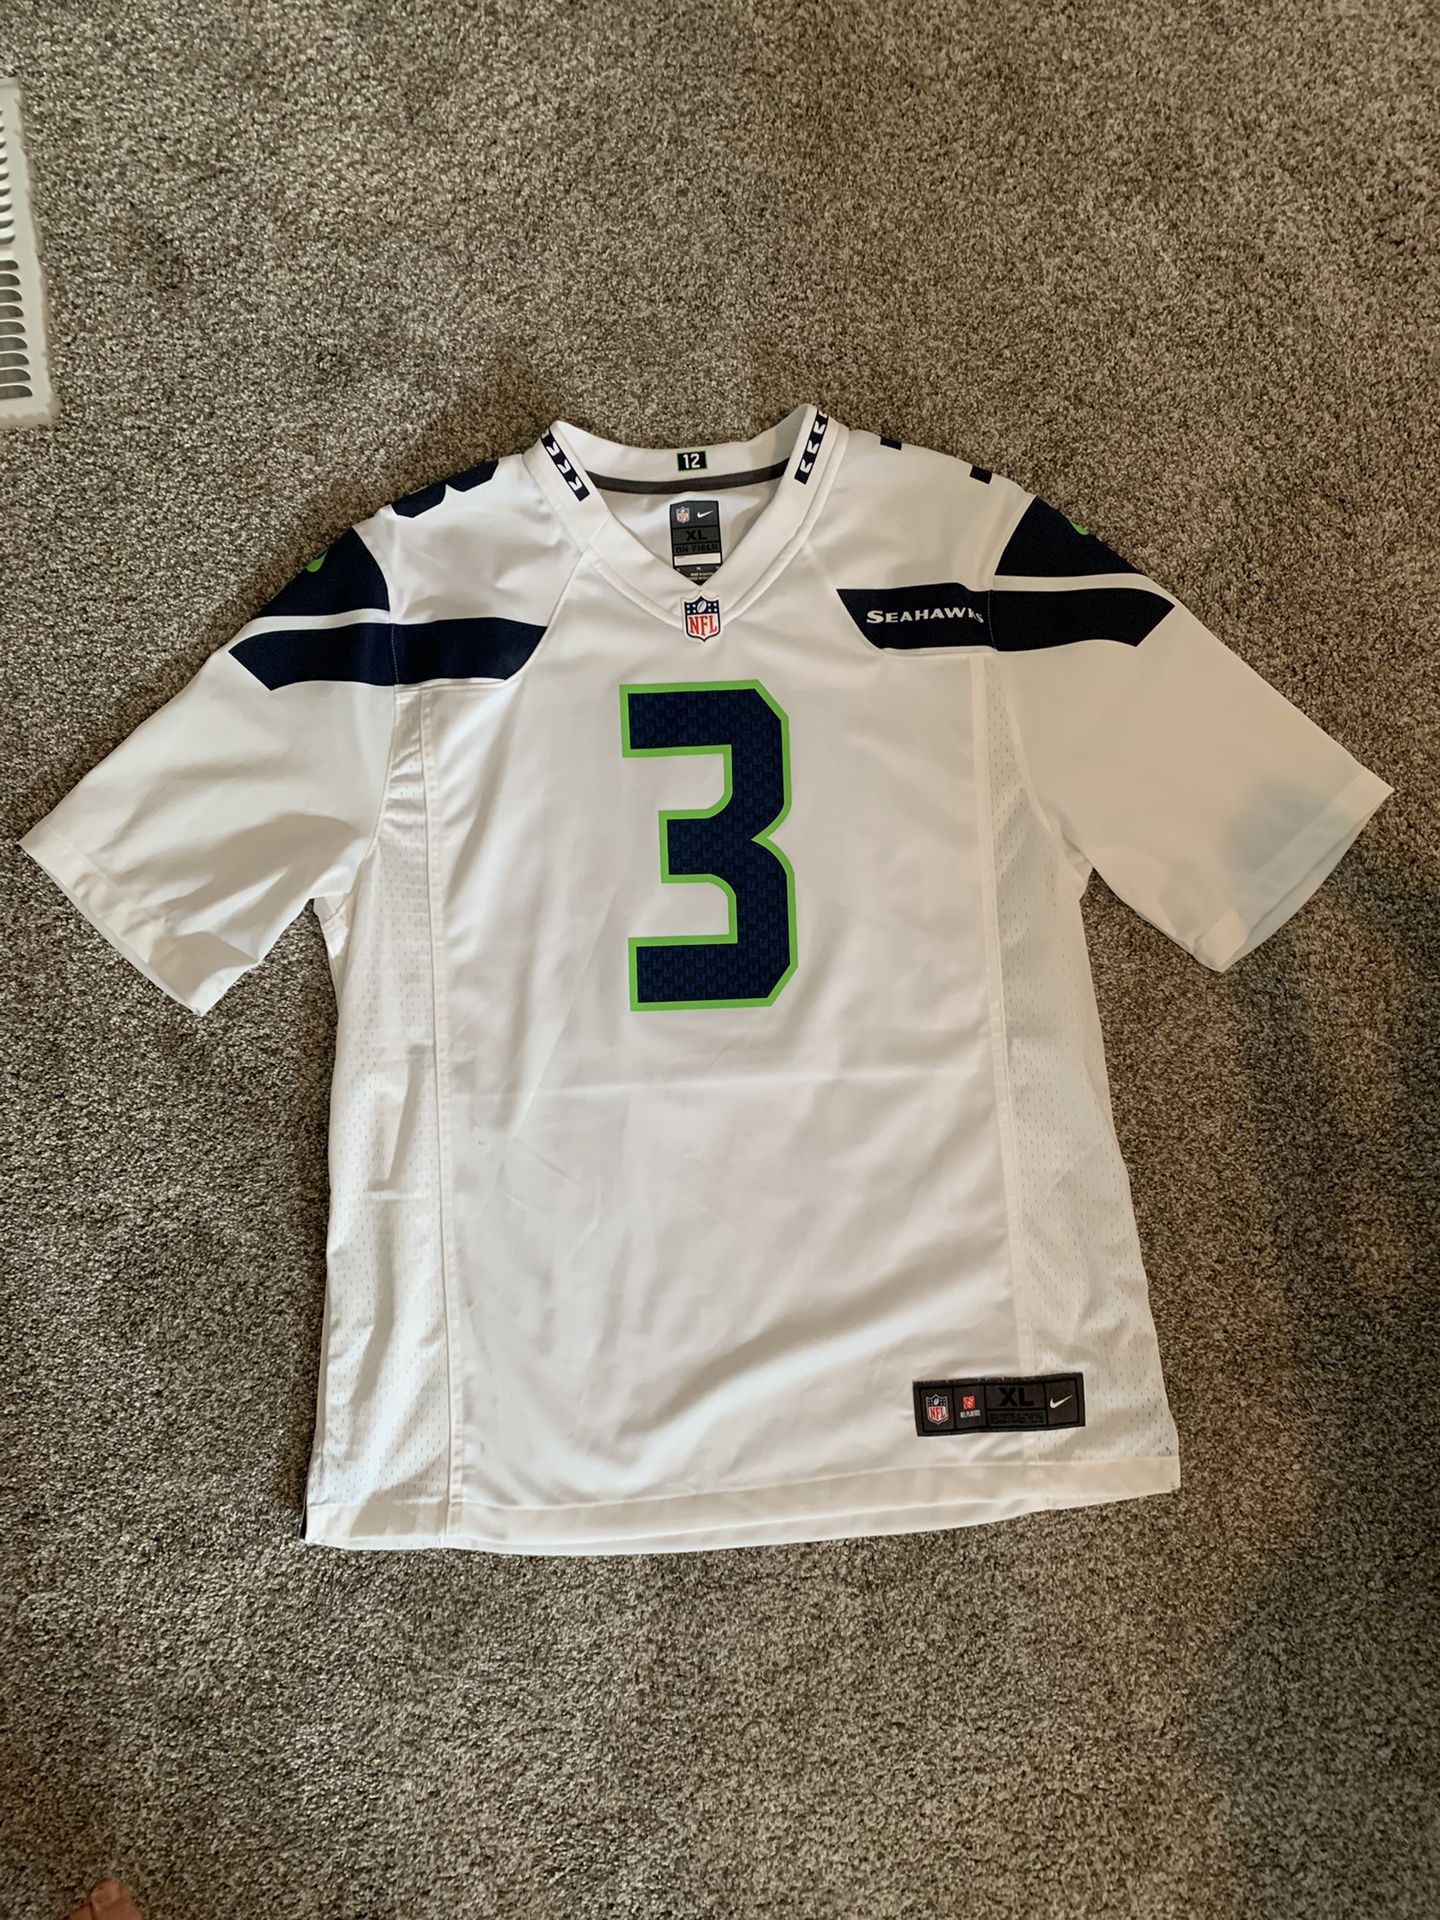 russell wilson jersey for sale